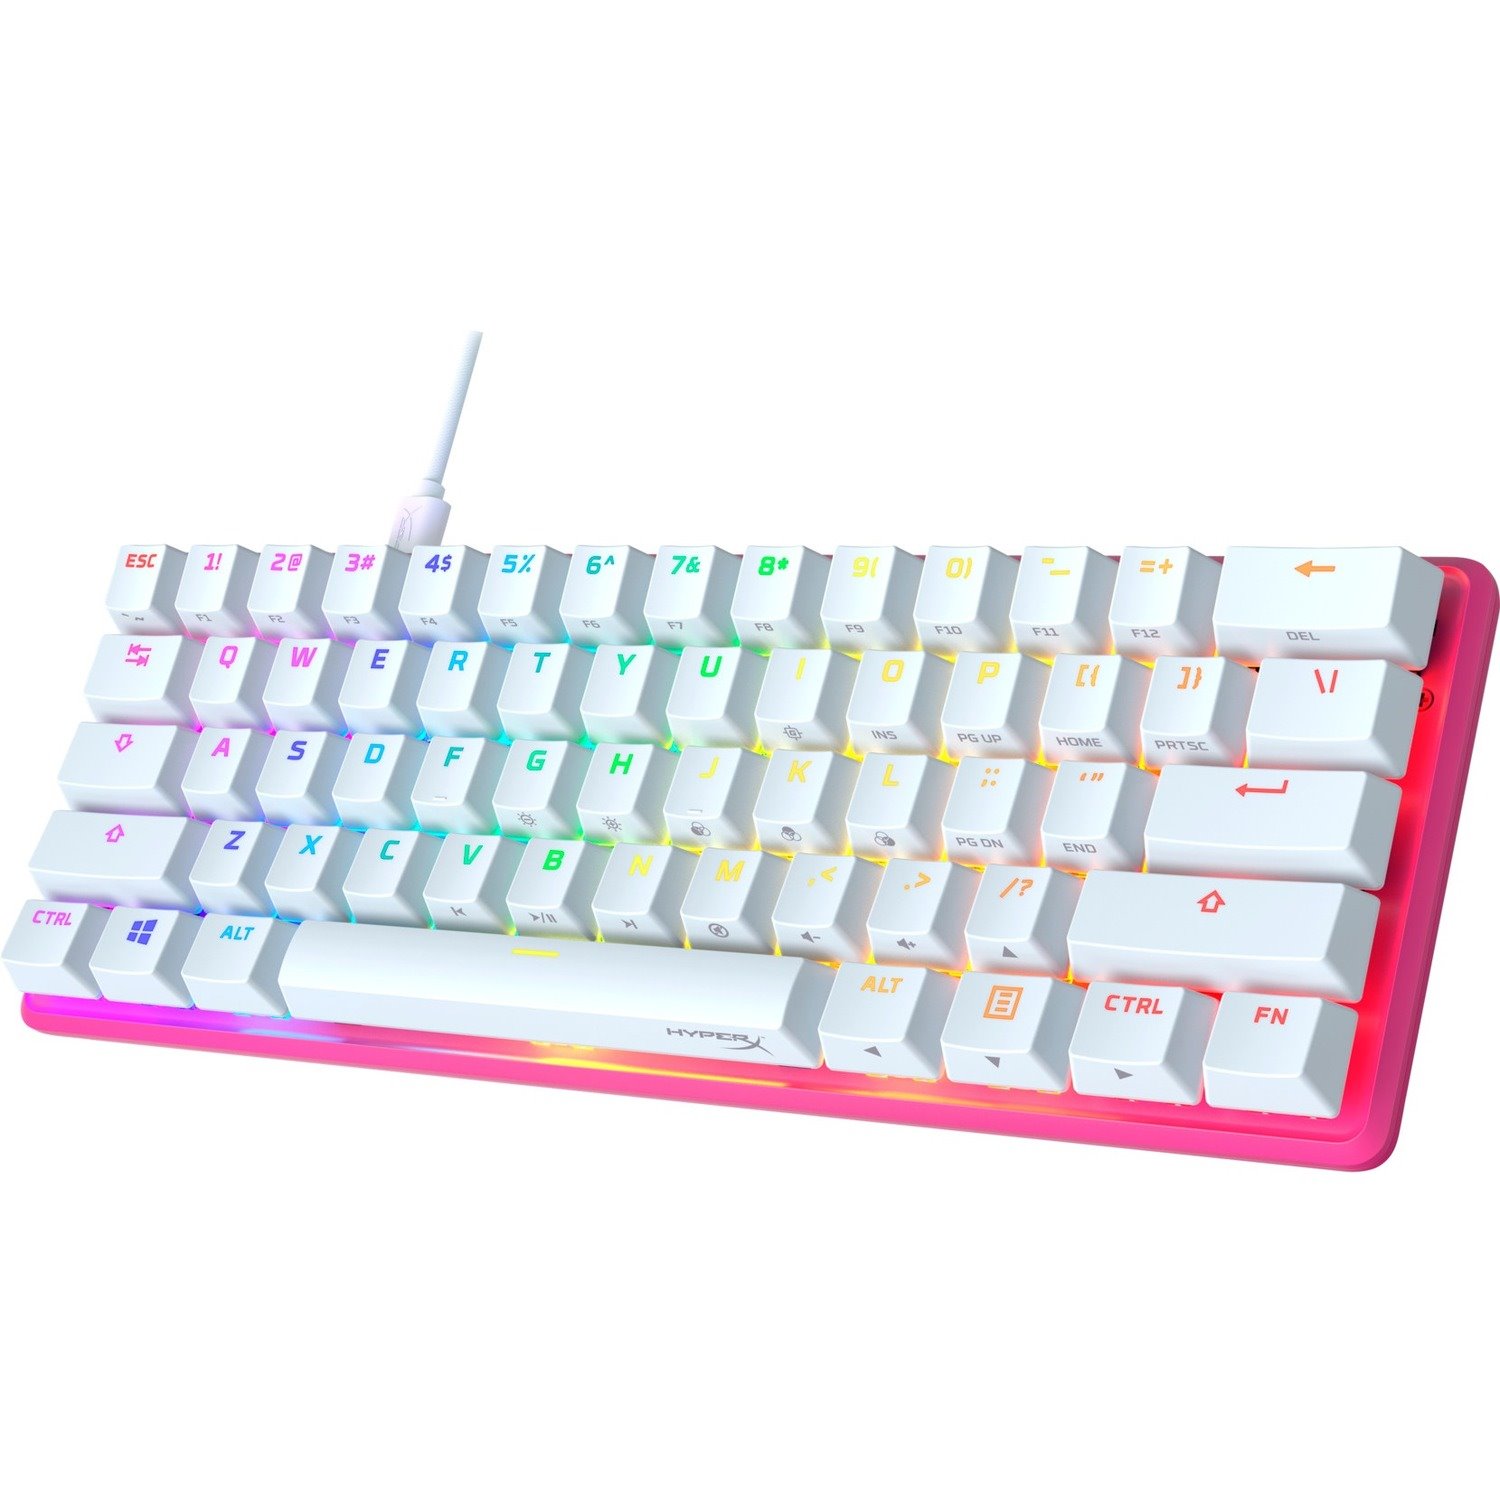 HyperX Alloy Origins 60 Gaming Keyboard - Cable Connectivity - USB Type C Interface - RGB LED - Pink